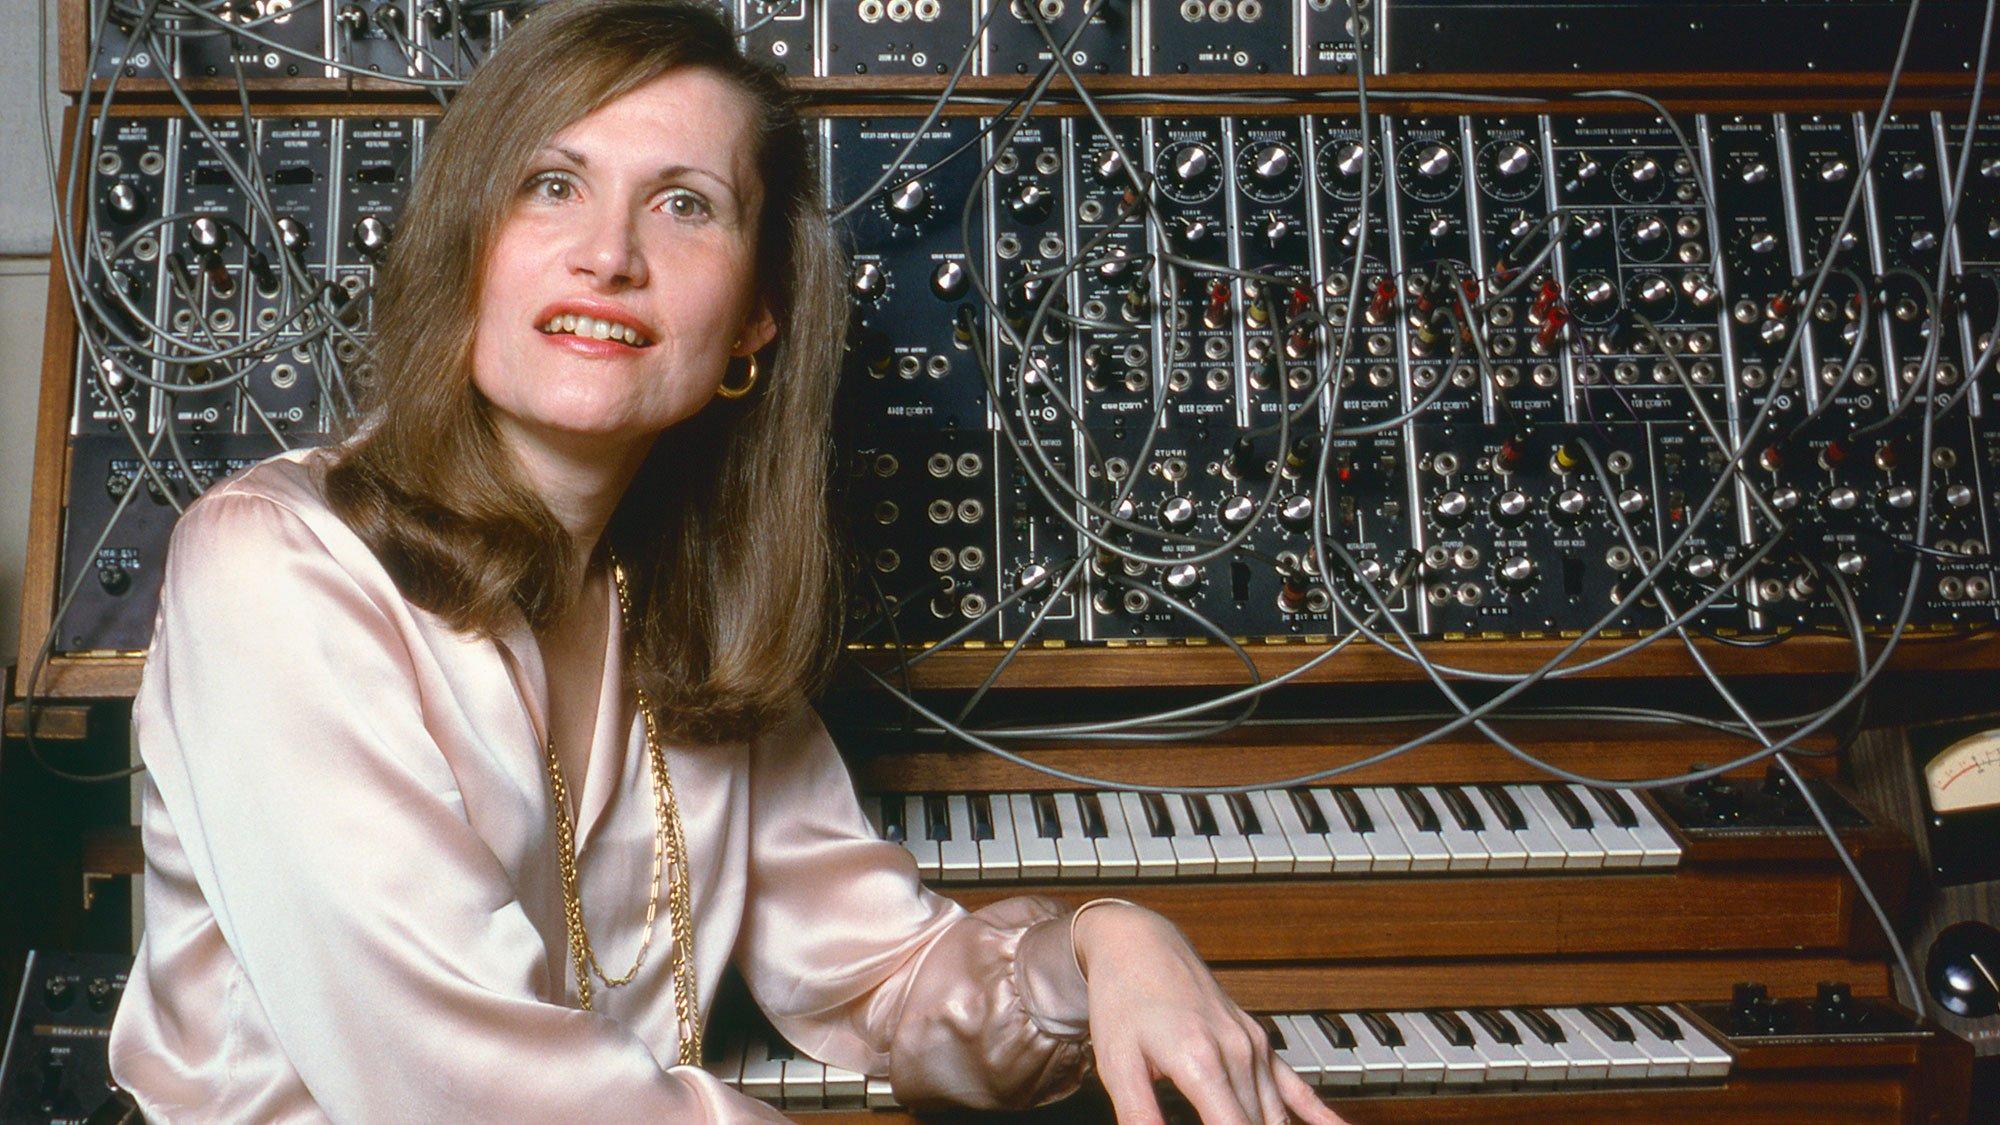 Wendy Carlos sits in front of a keyboard and modular synths at work in her New York City recording studio, October 1979.